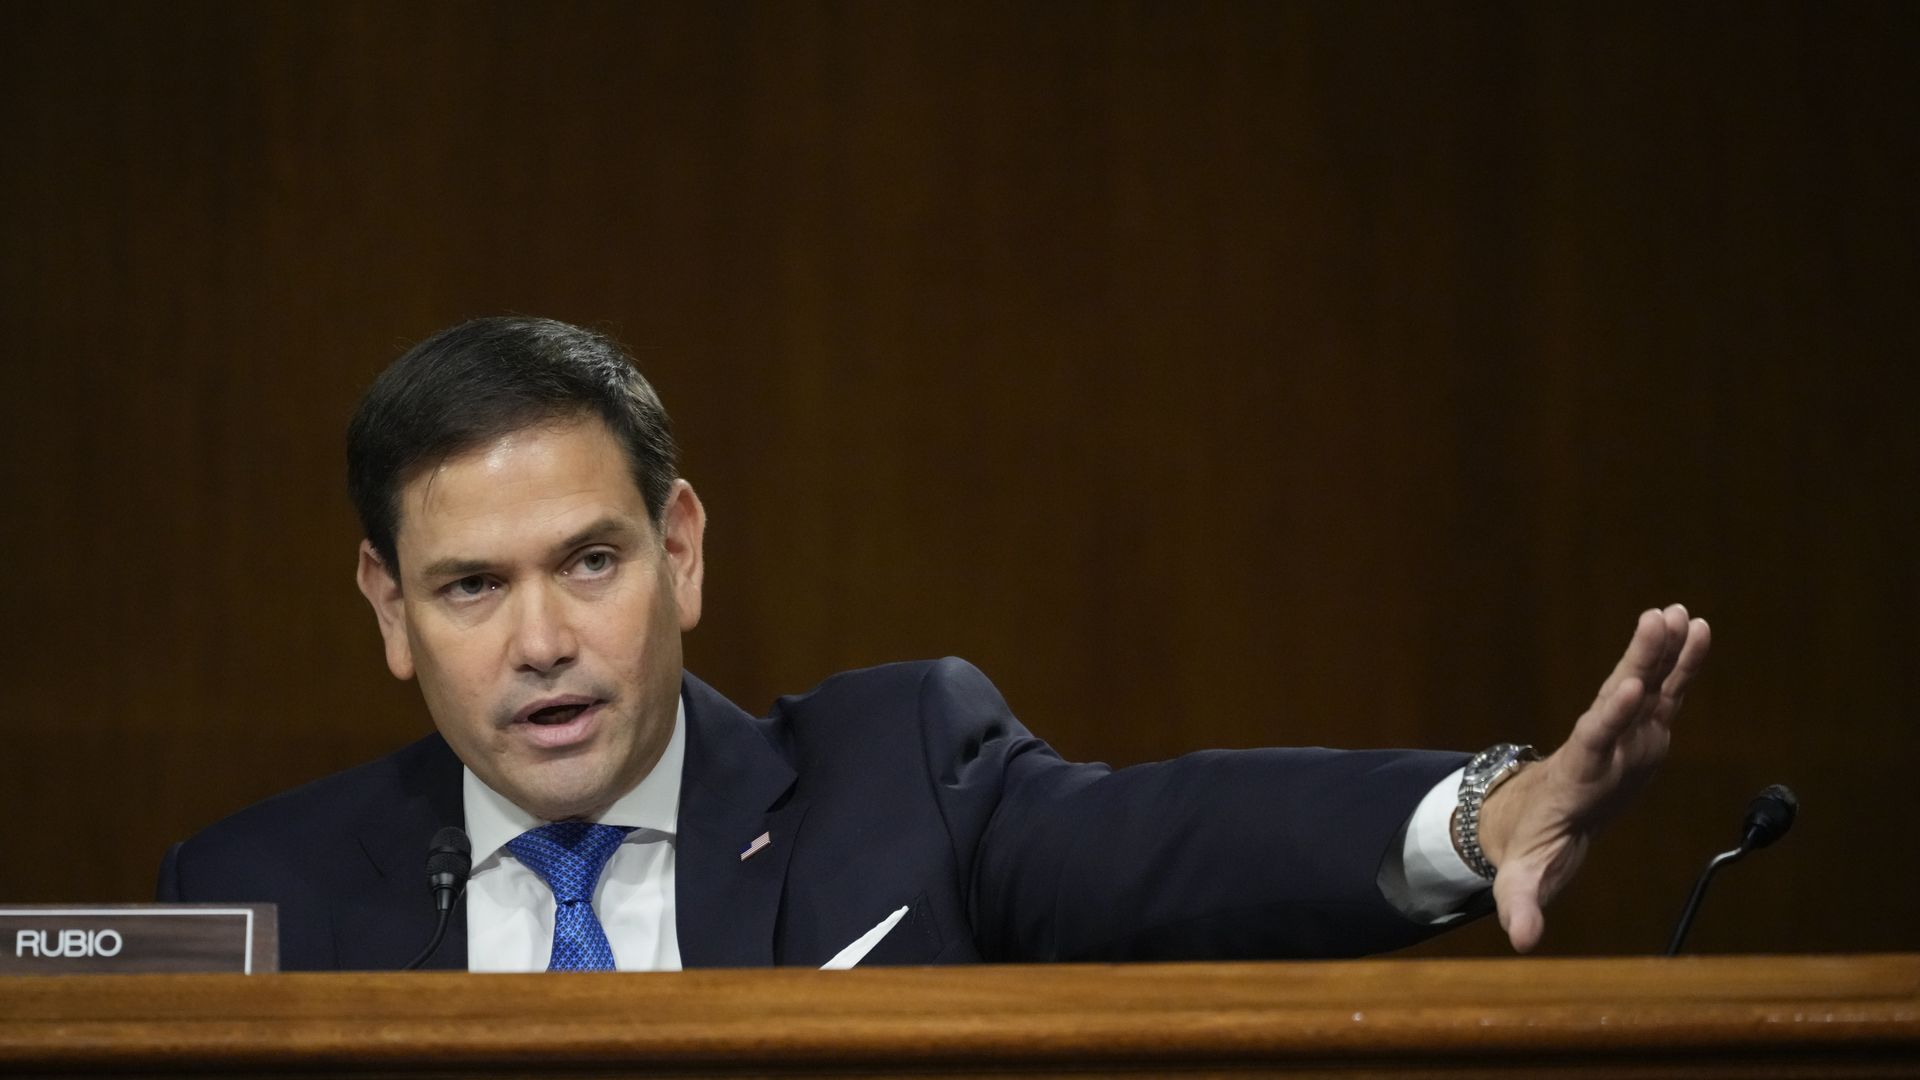 Sen. Marco Rubio is seen speaking during a congressional hearing.